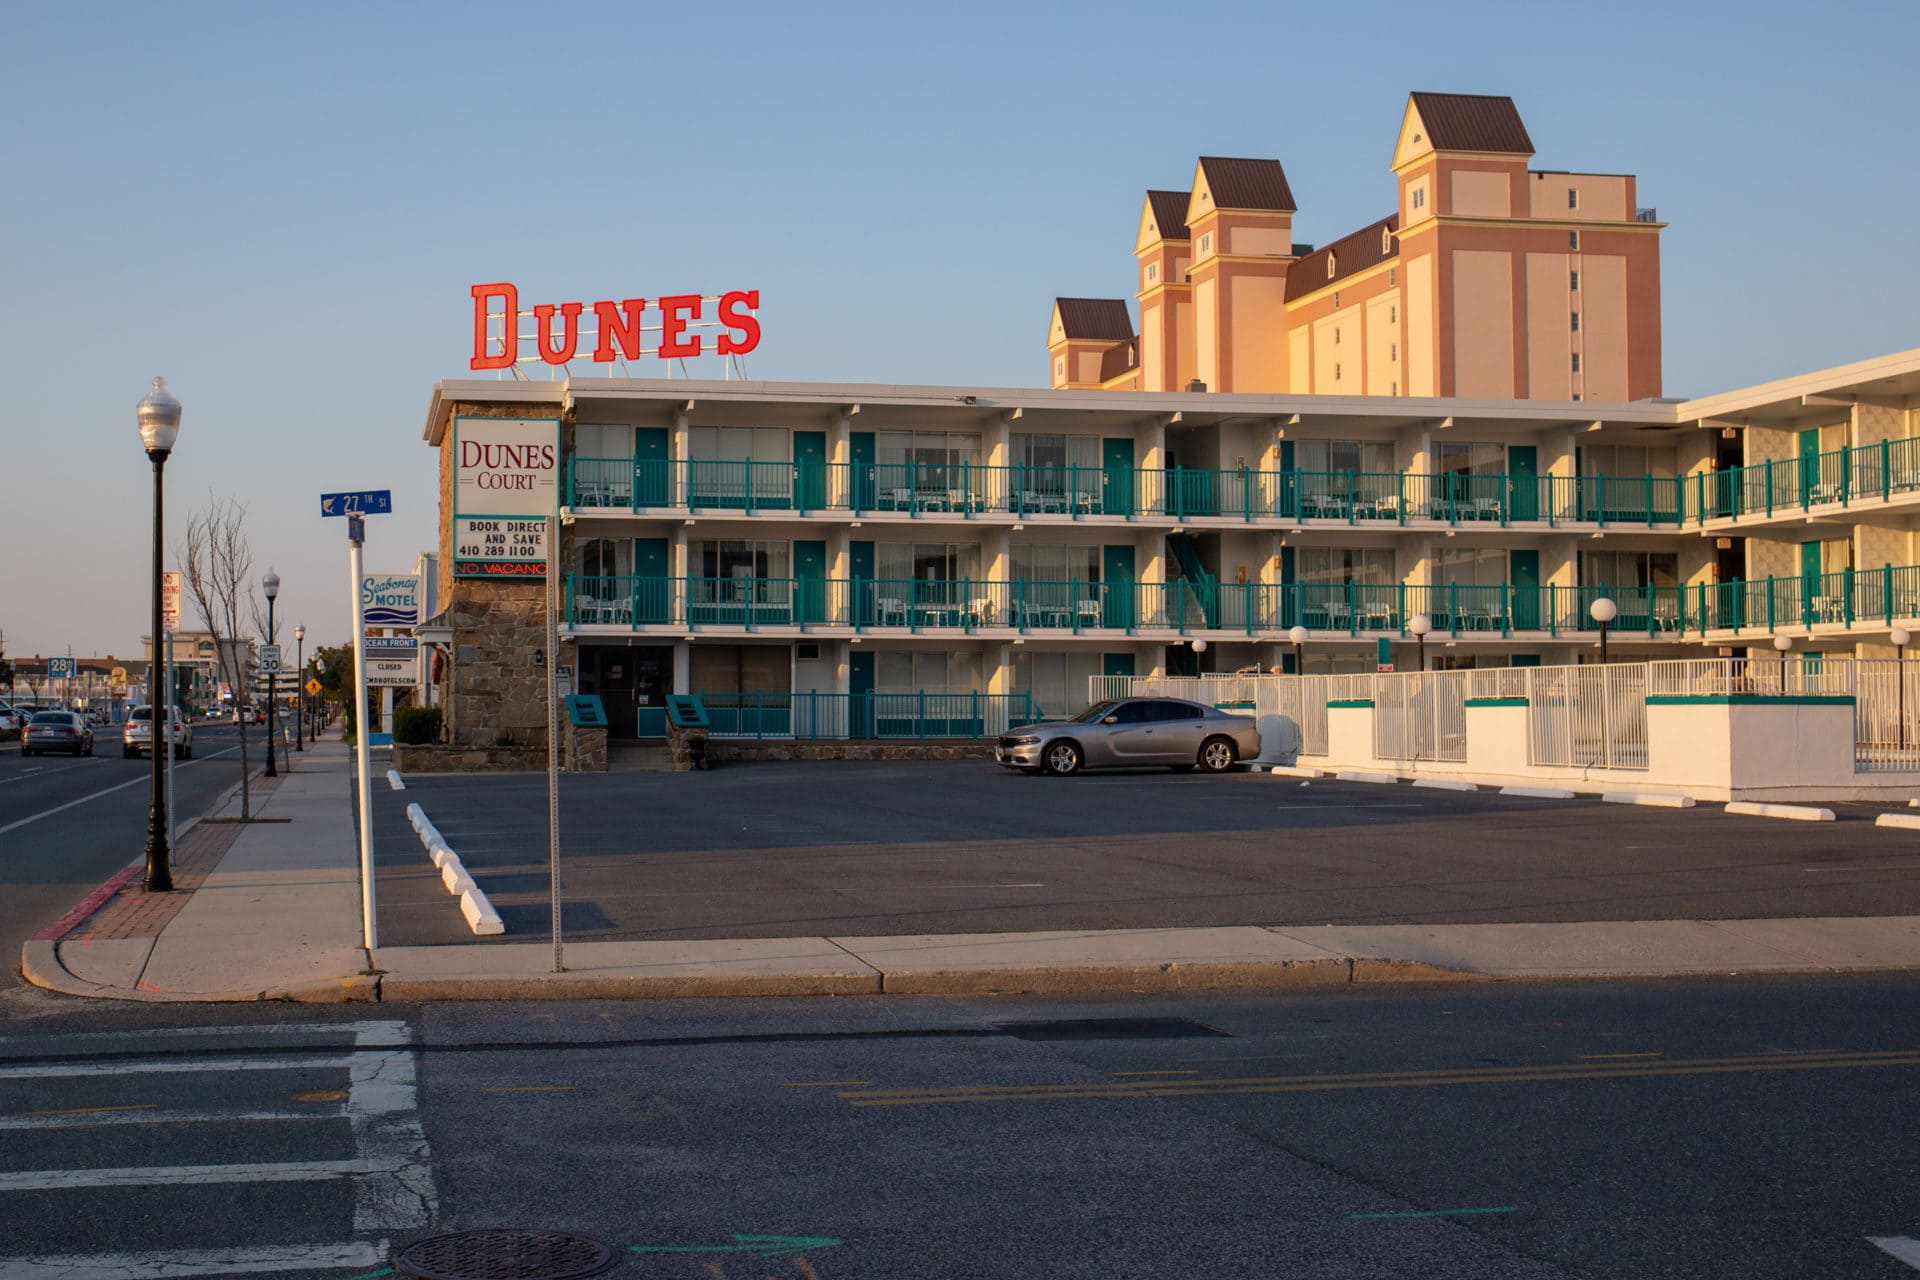 Vintage hotel with green balconies and a sign that reads "Dunes"